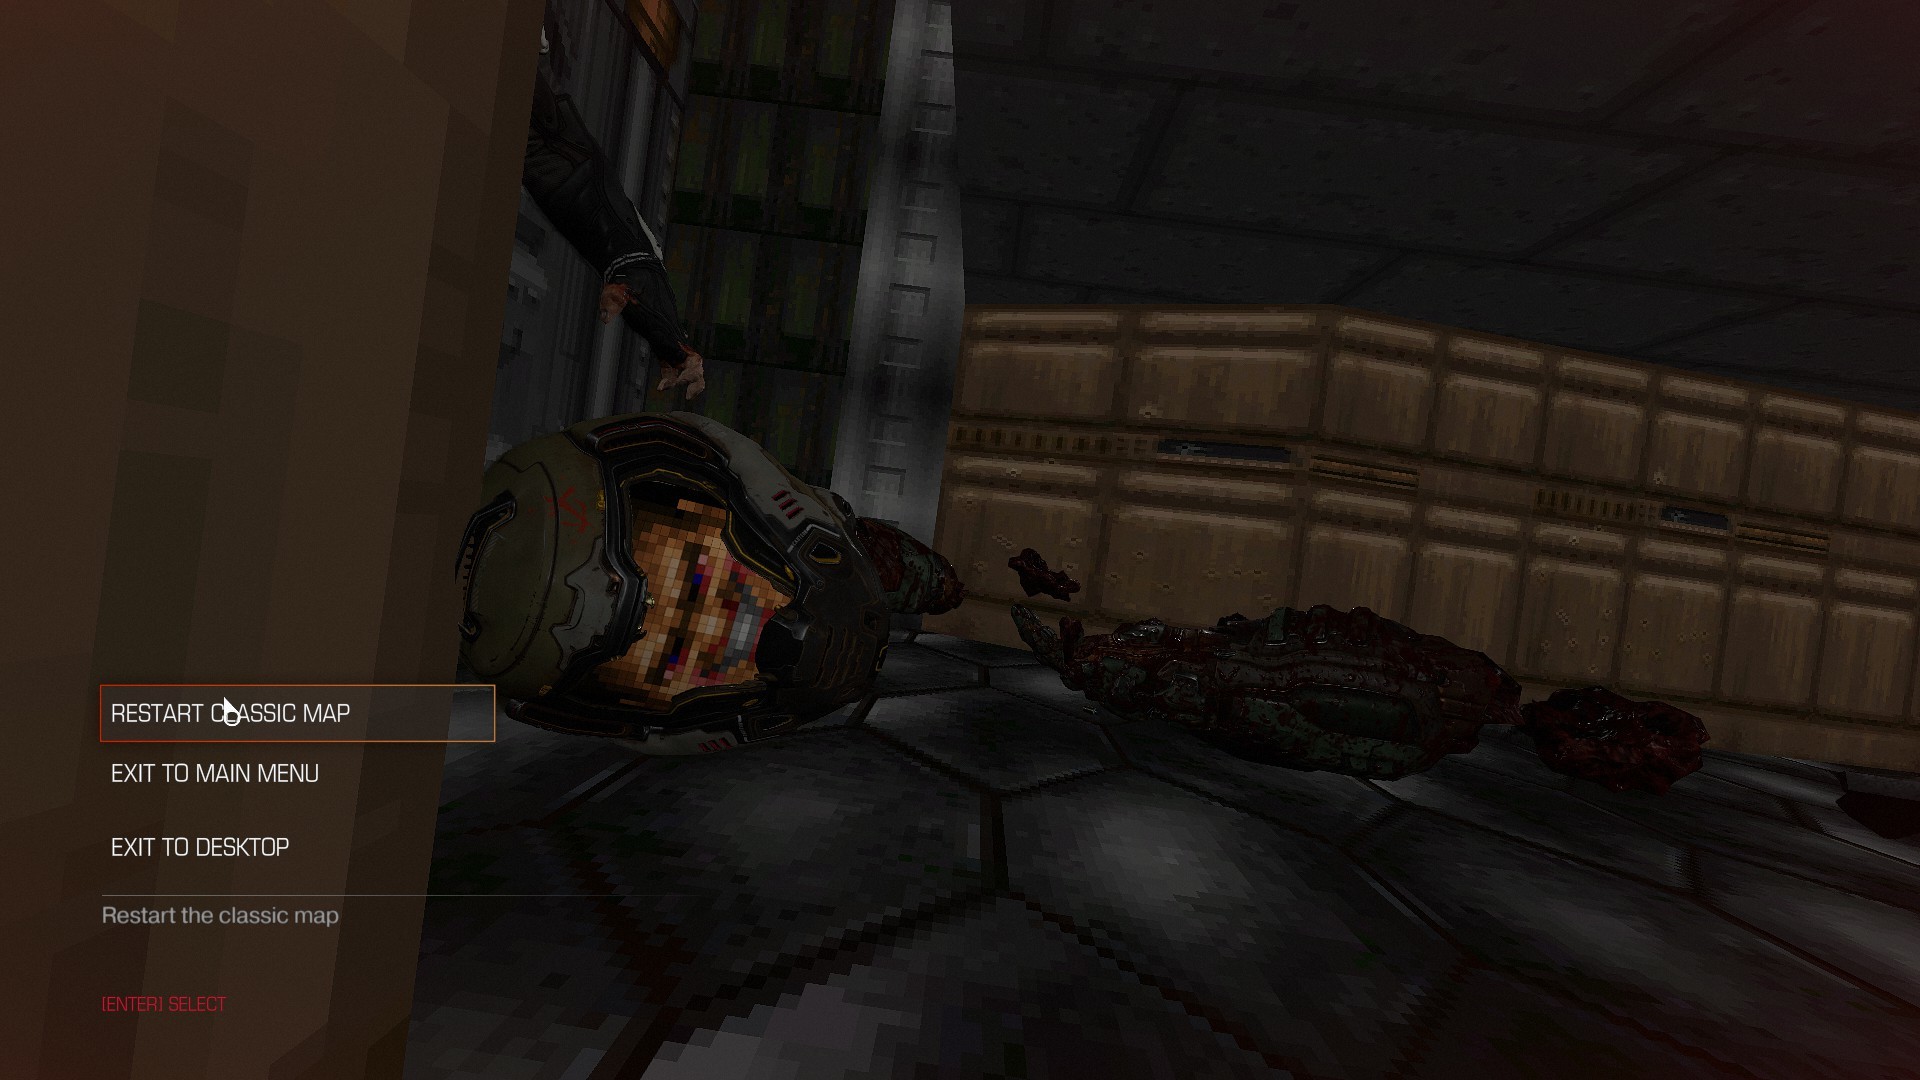 1920x1080 If you're gibbed (blown up into tiny chunks) — and if your camera is facing  your decapitated helmet, you'll get a glimpse of the classic DOOM guy's  face.